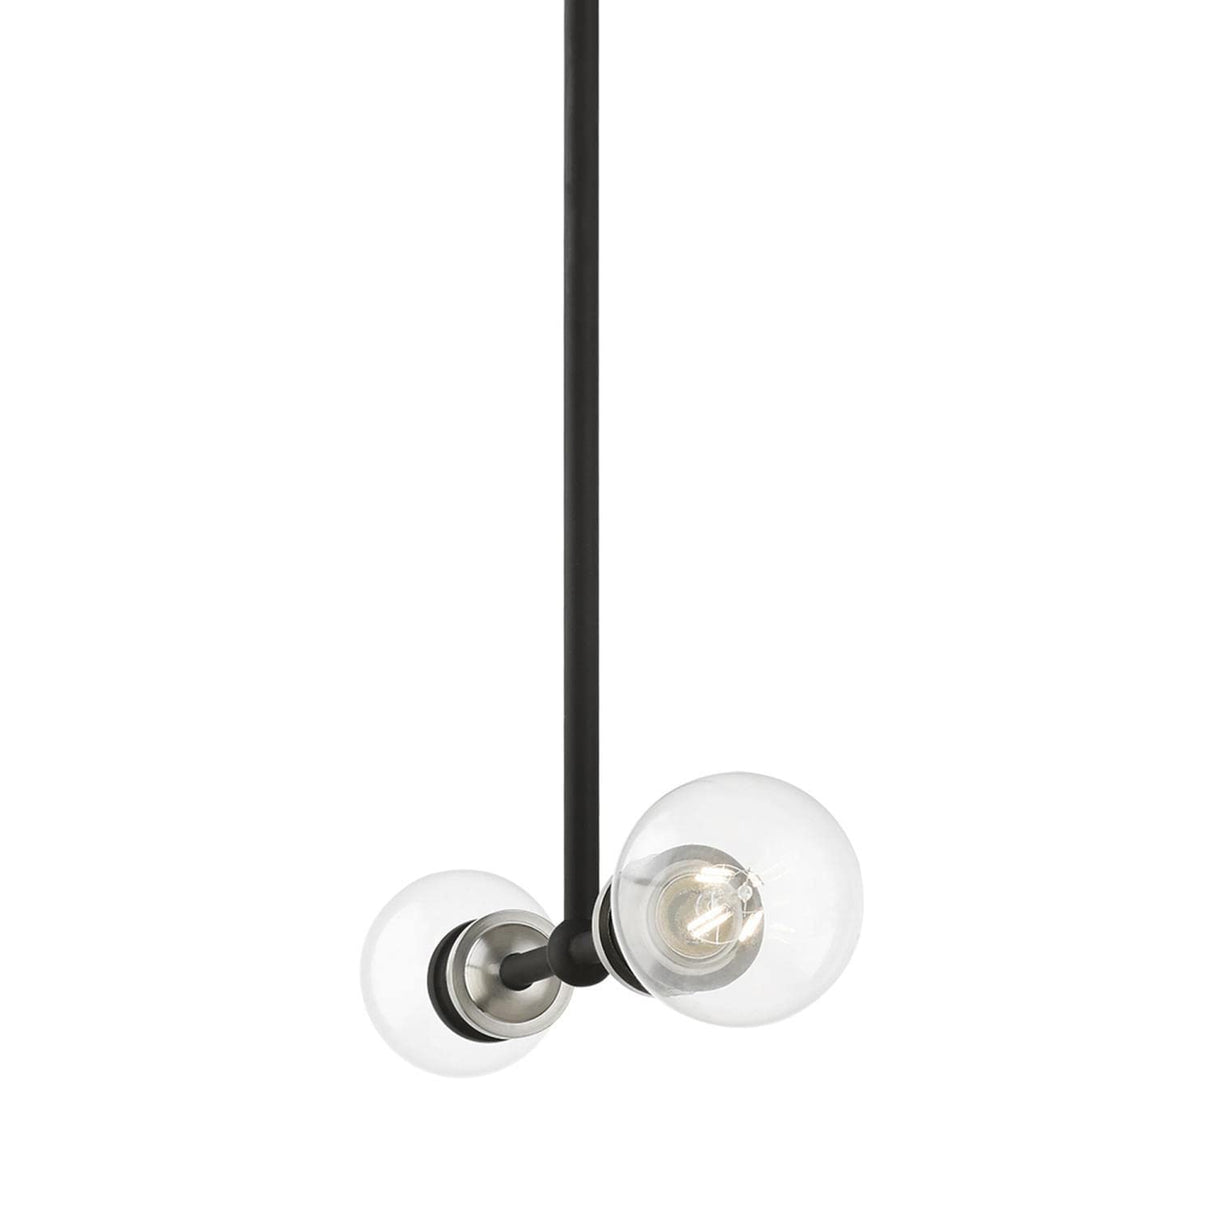 Lansdale 2 Light Linear Chandelier in Black with Brushed Nickel (47162-04)